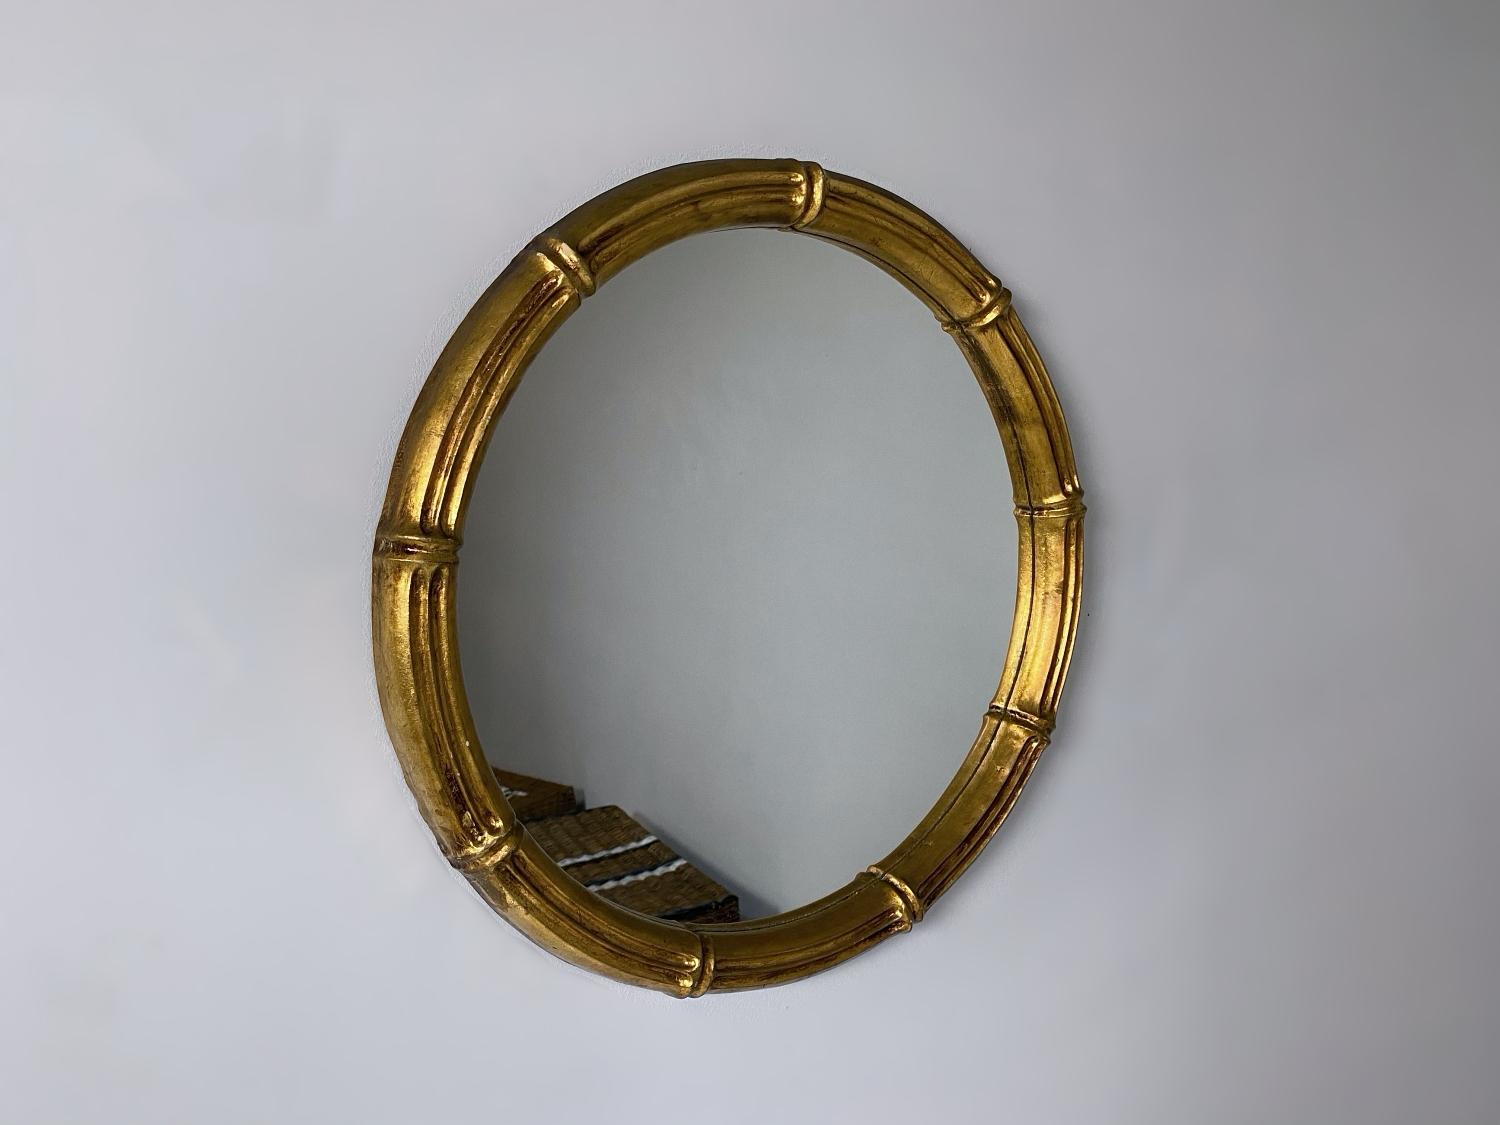 Modern Max Welz Giltwood Faux Bamboo Wall Mirror, 1940s, Austria For Sale